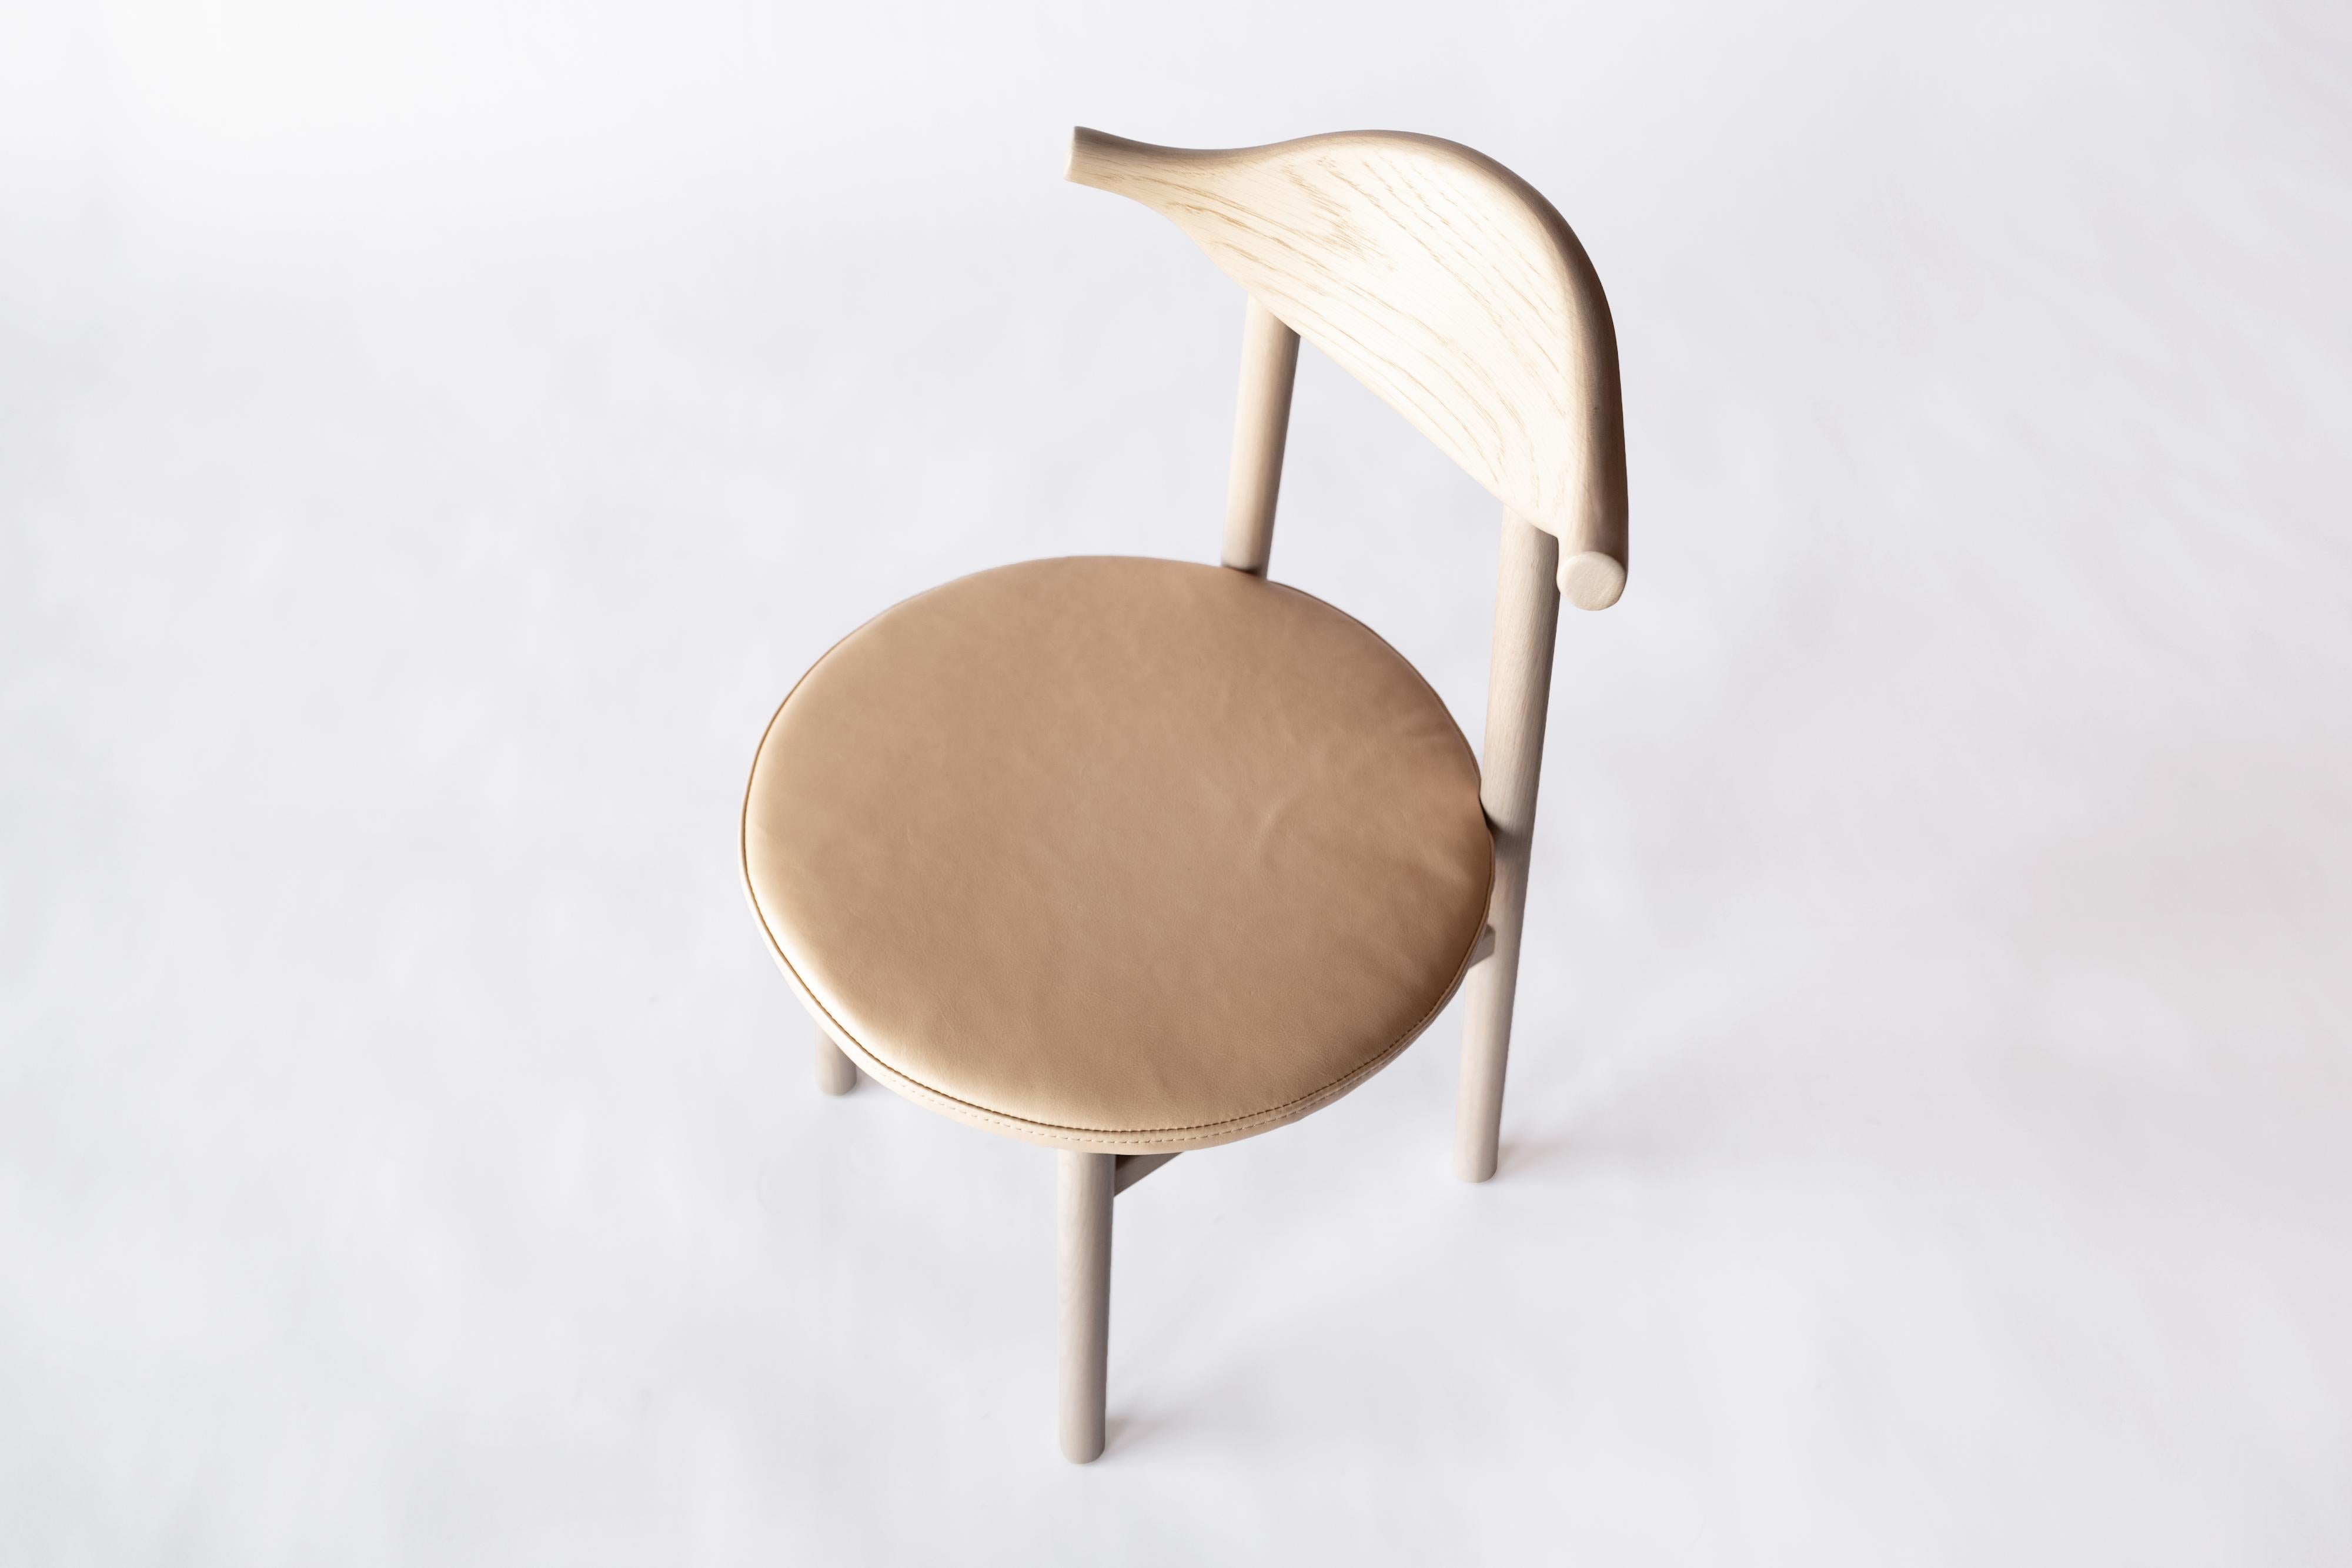 Sun at six is a contemporary furniture design studio working with traditional Chinese joinery masters to handcraft our pieces using traditional joinery. The Ember chair is a versatile seat made using traditional joinery techniques. The wide, curved